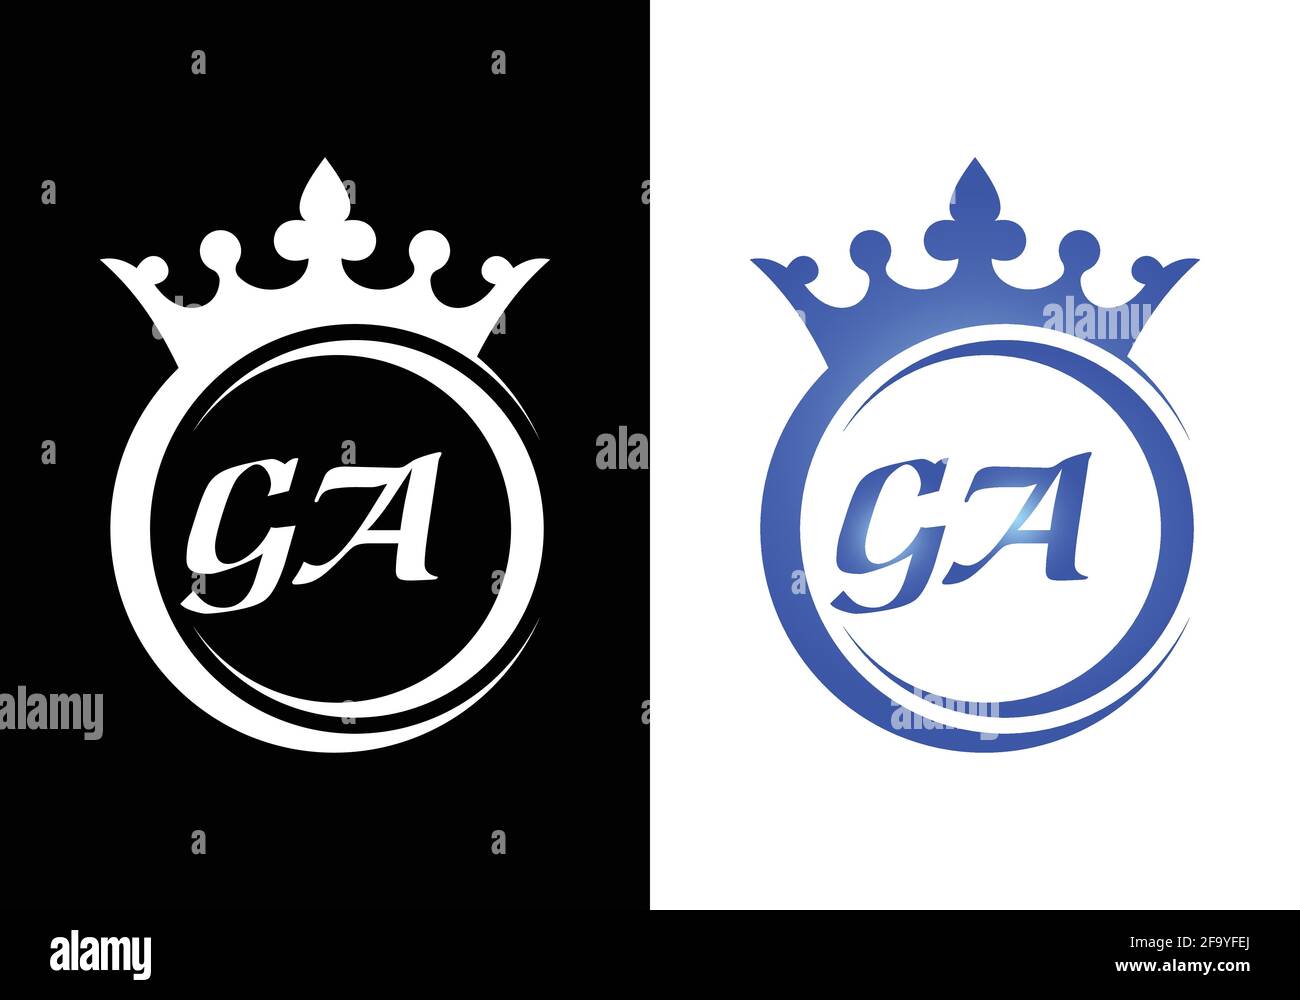 king crown letter alphabet G A for company logo icon design. Stock Vector